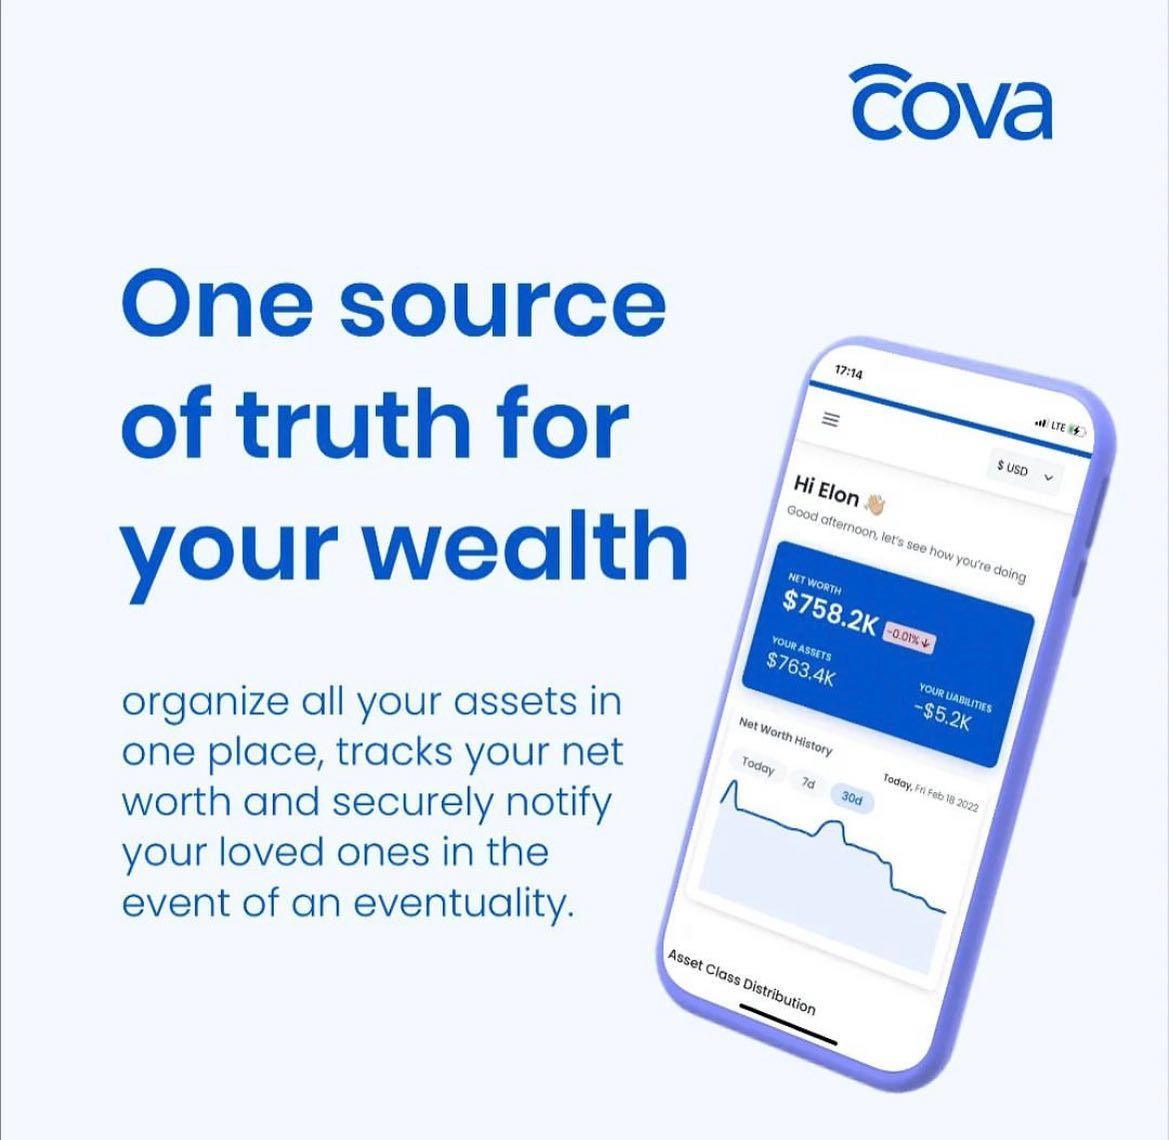 Nigerian Wealthtech Cova Sets to Shut Down After Two Years of Operations